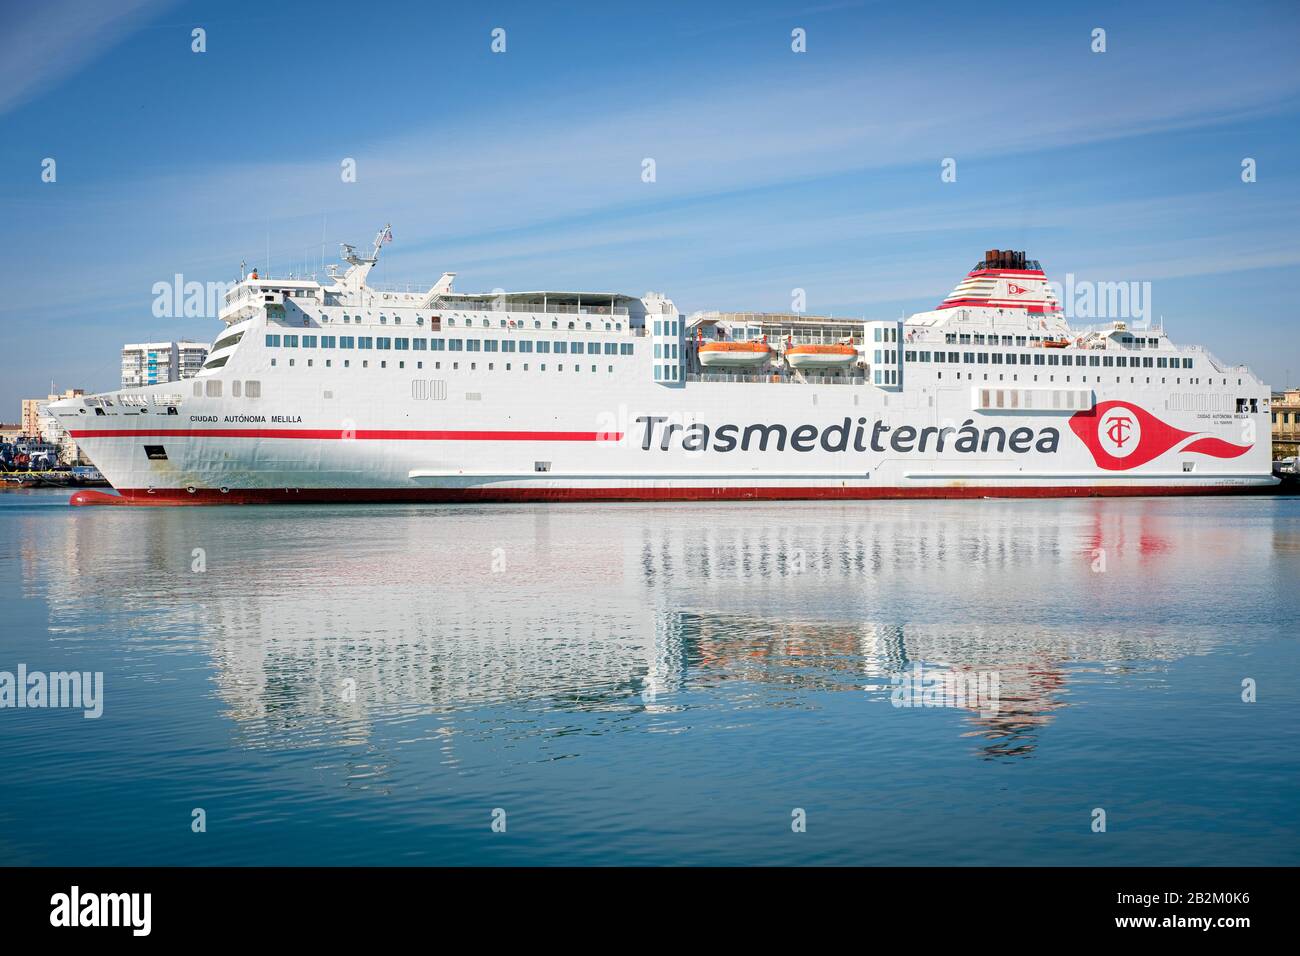 The ferry Ciudad Antonoma Melilla which sails between Spain and Melilla in Africa. Stock Photo